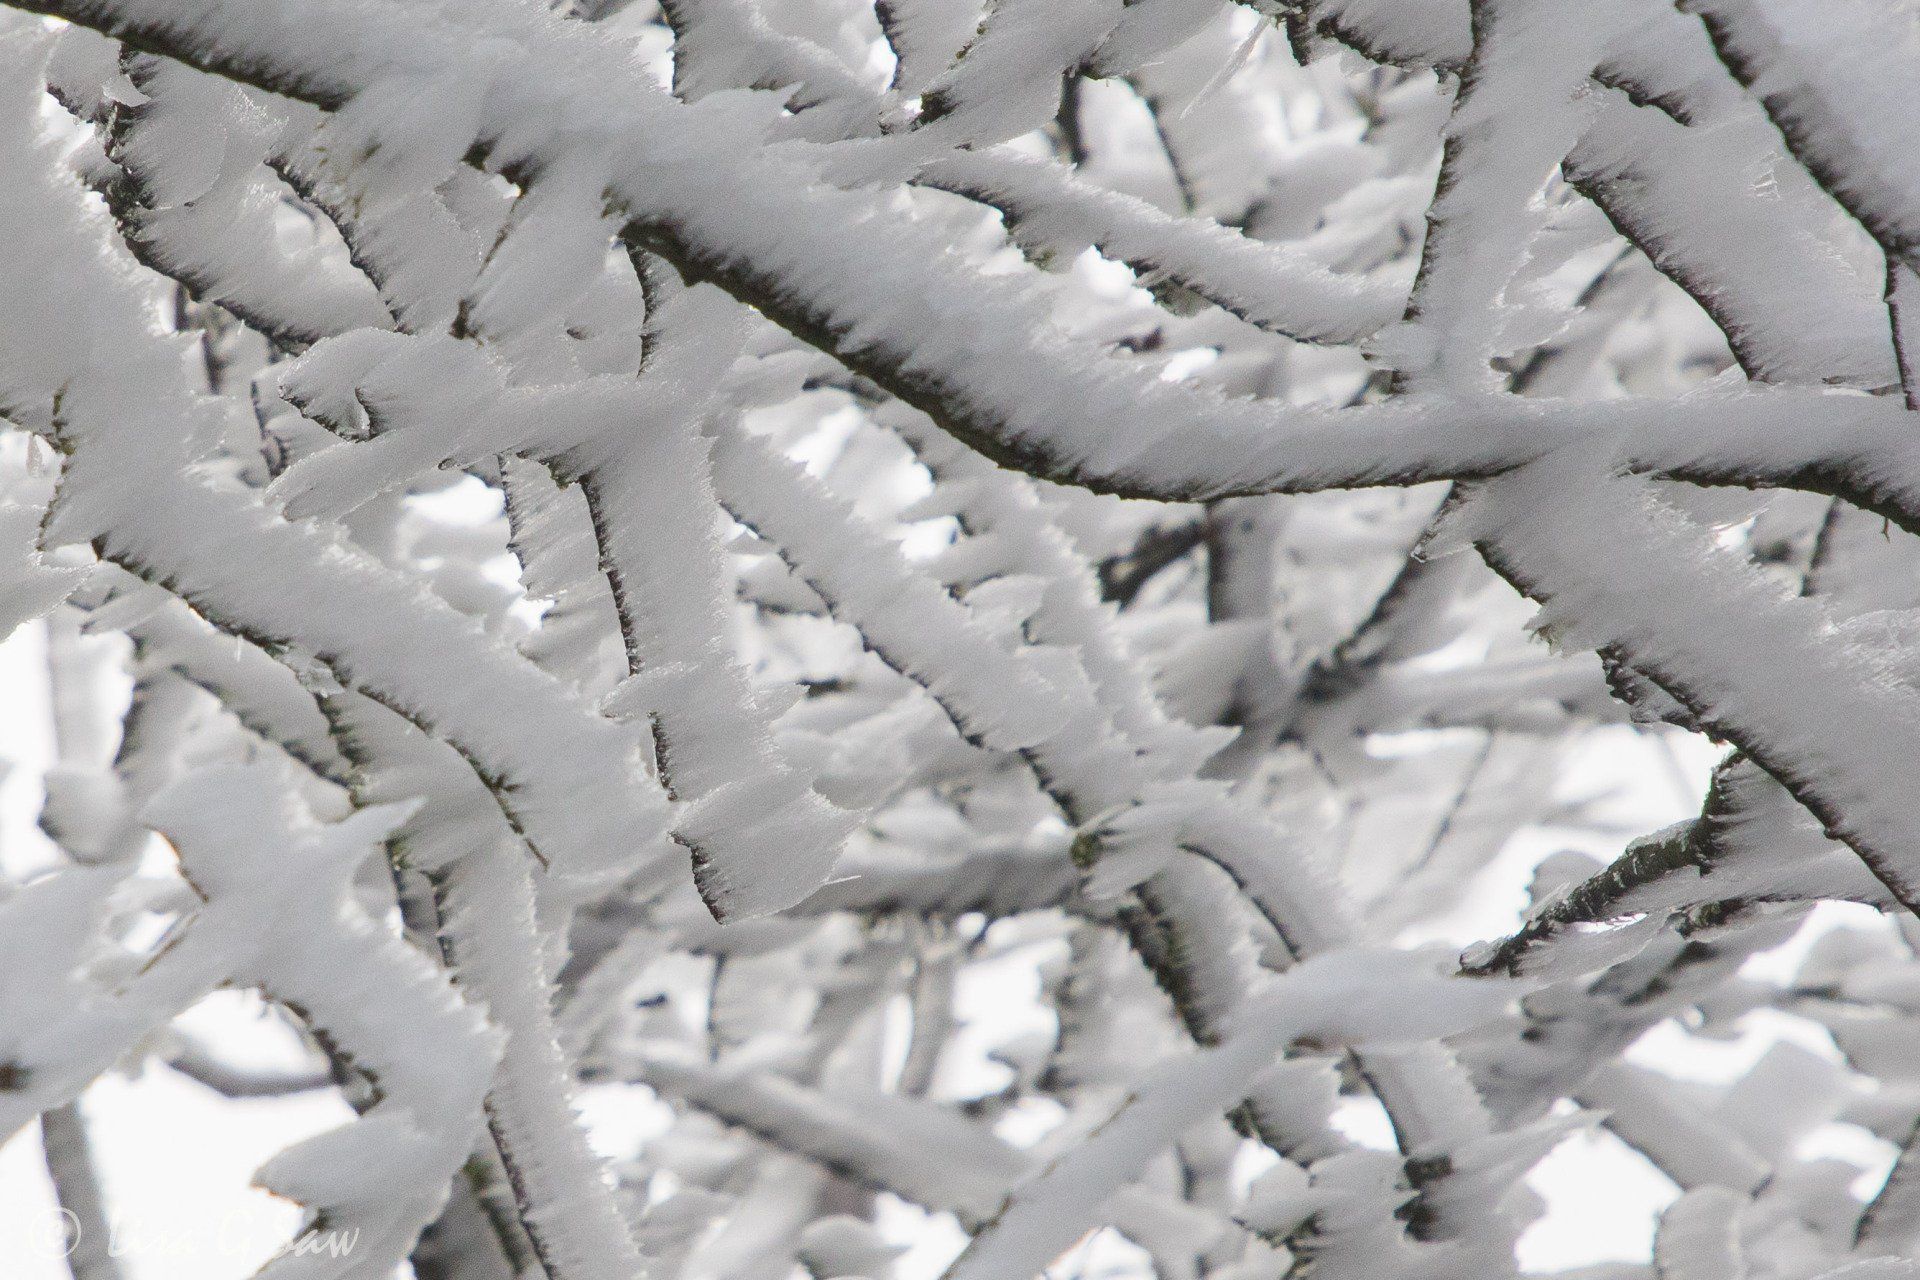 Mosaic of hoar frost on branches